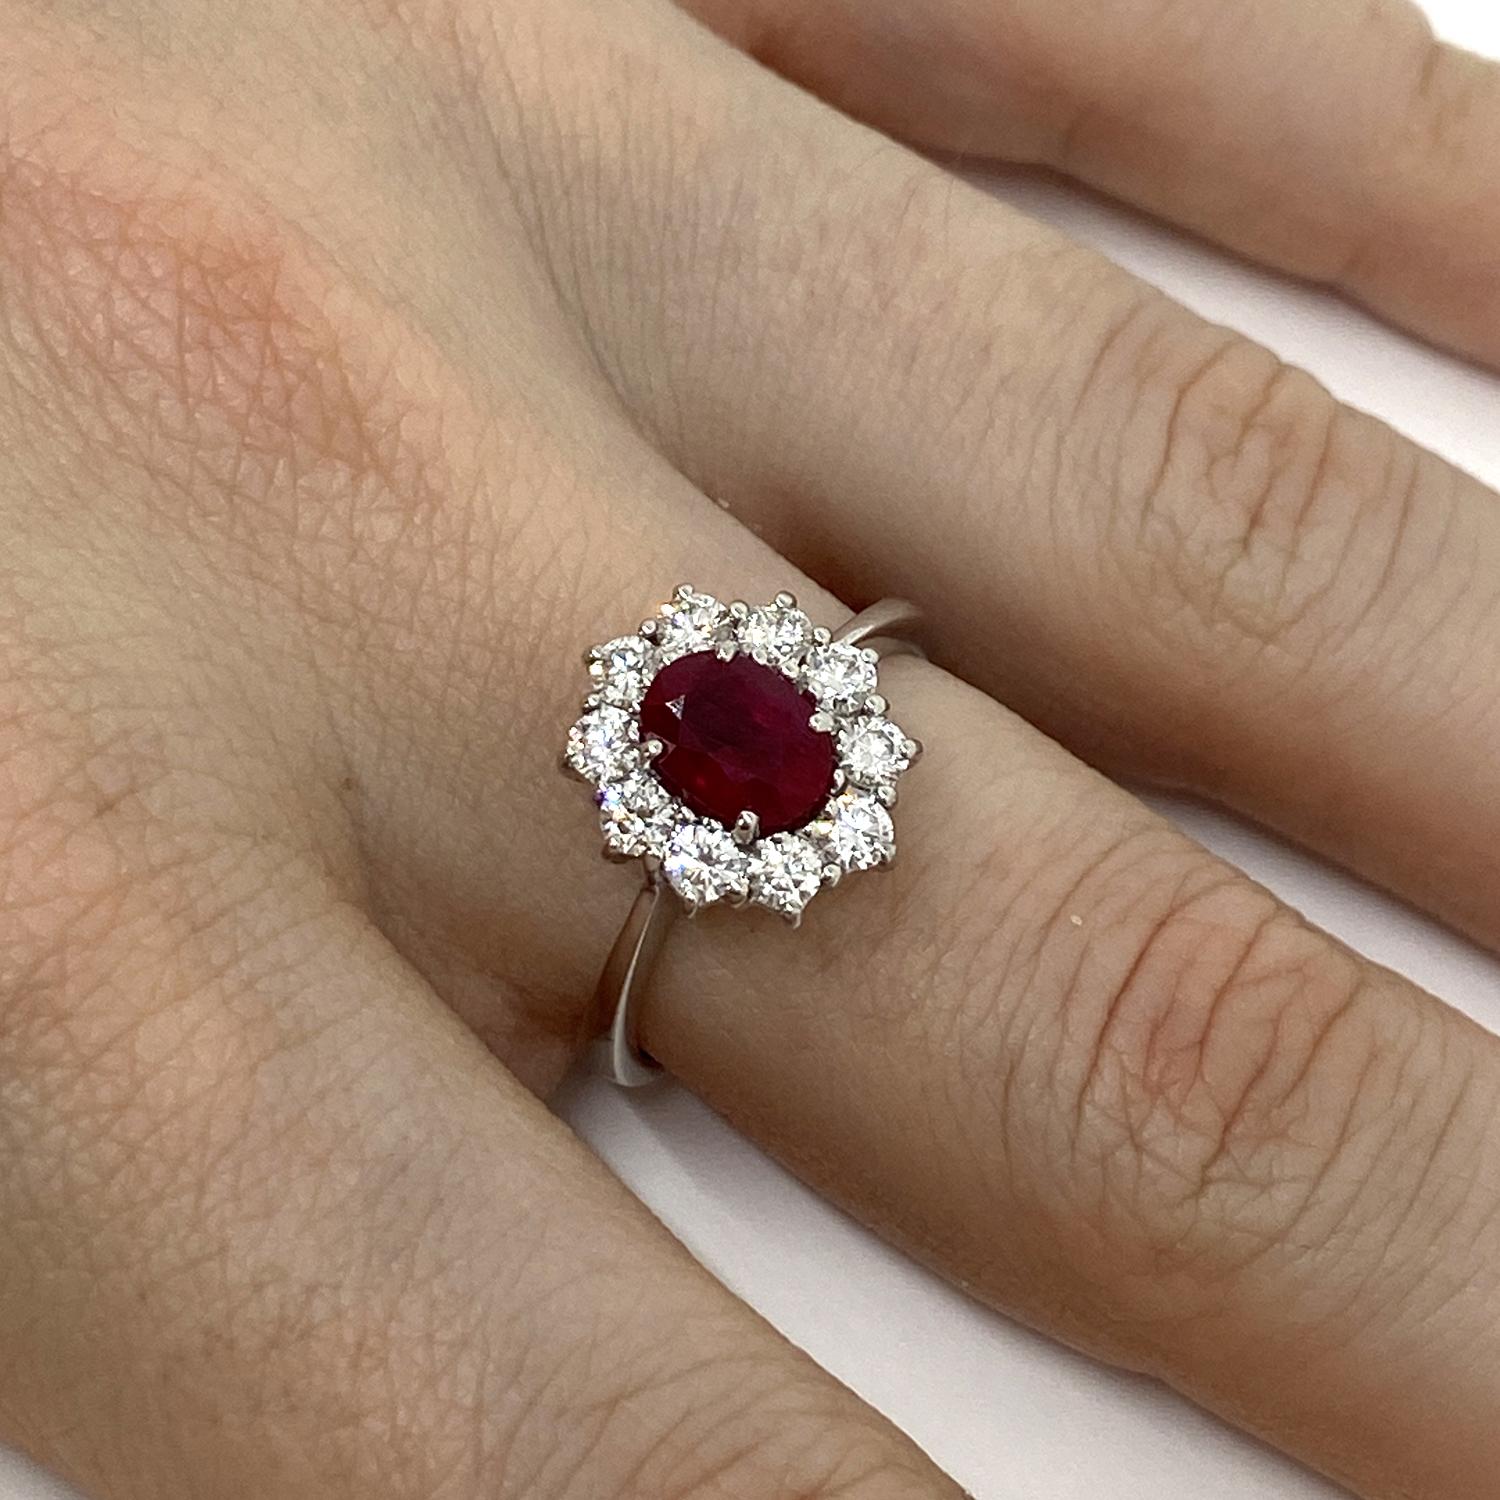 Ring made of 18kt white gold with natural oval-cut ruby for ct.1.16 and natural brilliant-cut white diamonds for ct.0.67
-------------------------------------------------

Important Note : In order to speed up the publishing process of our vast